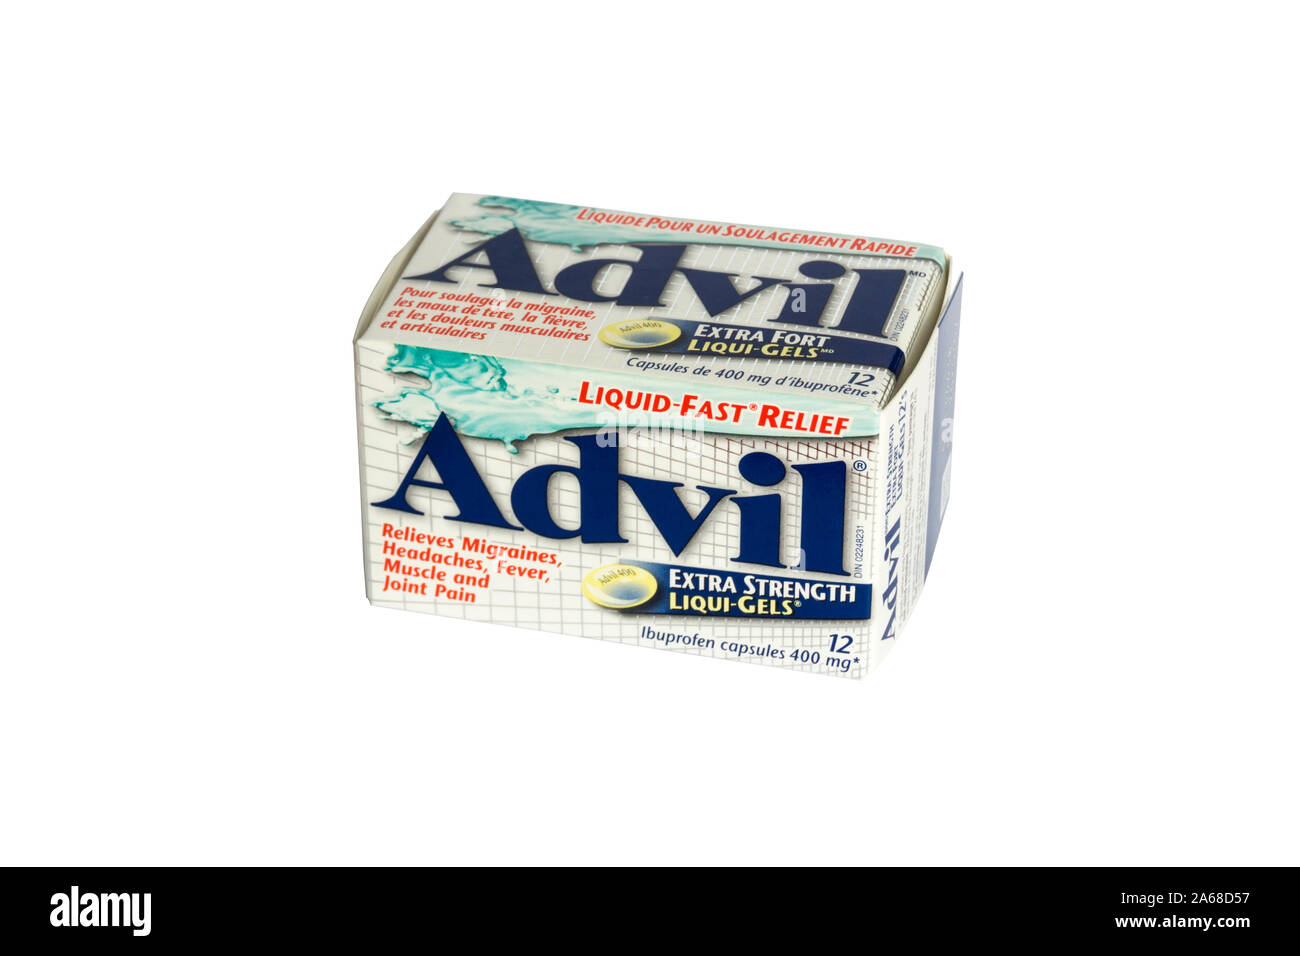 Advil High Resolution Stock Photography and Images - Alamy